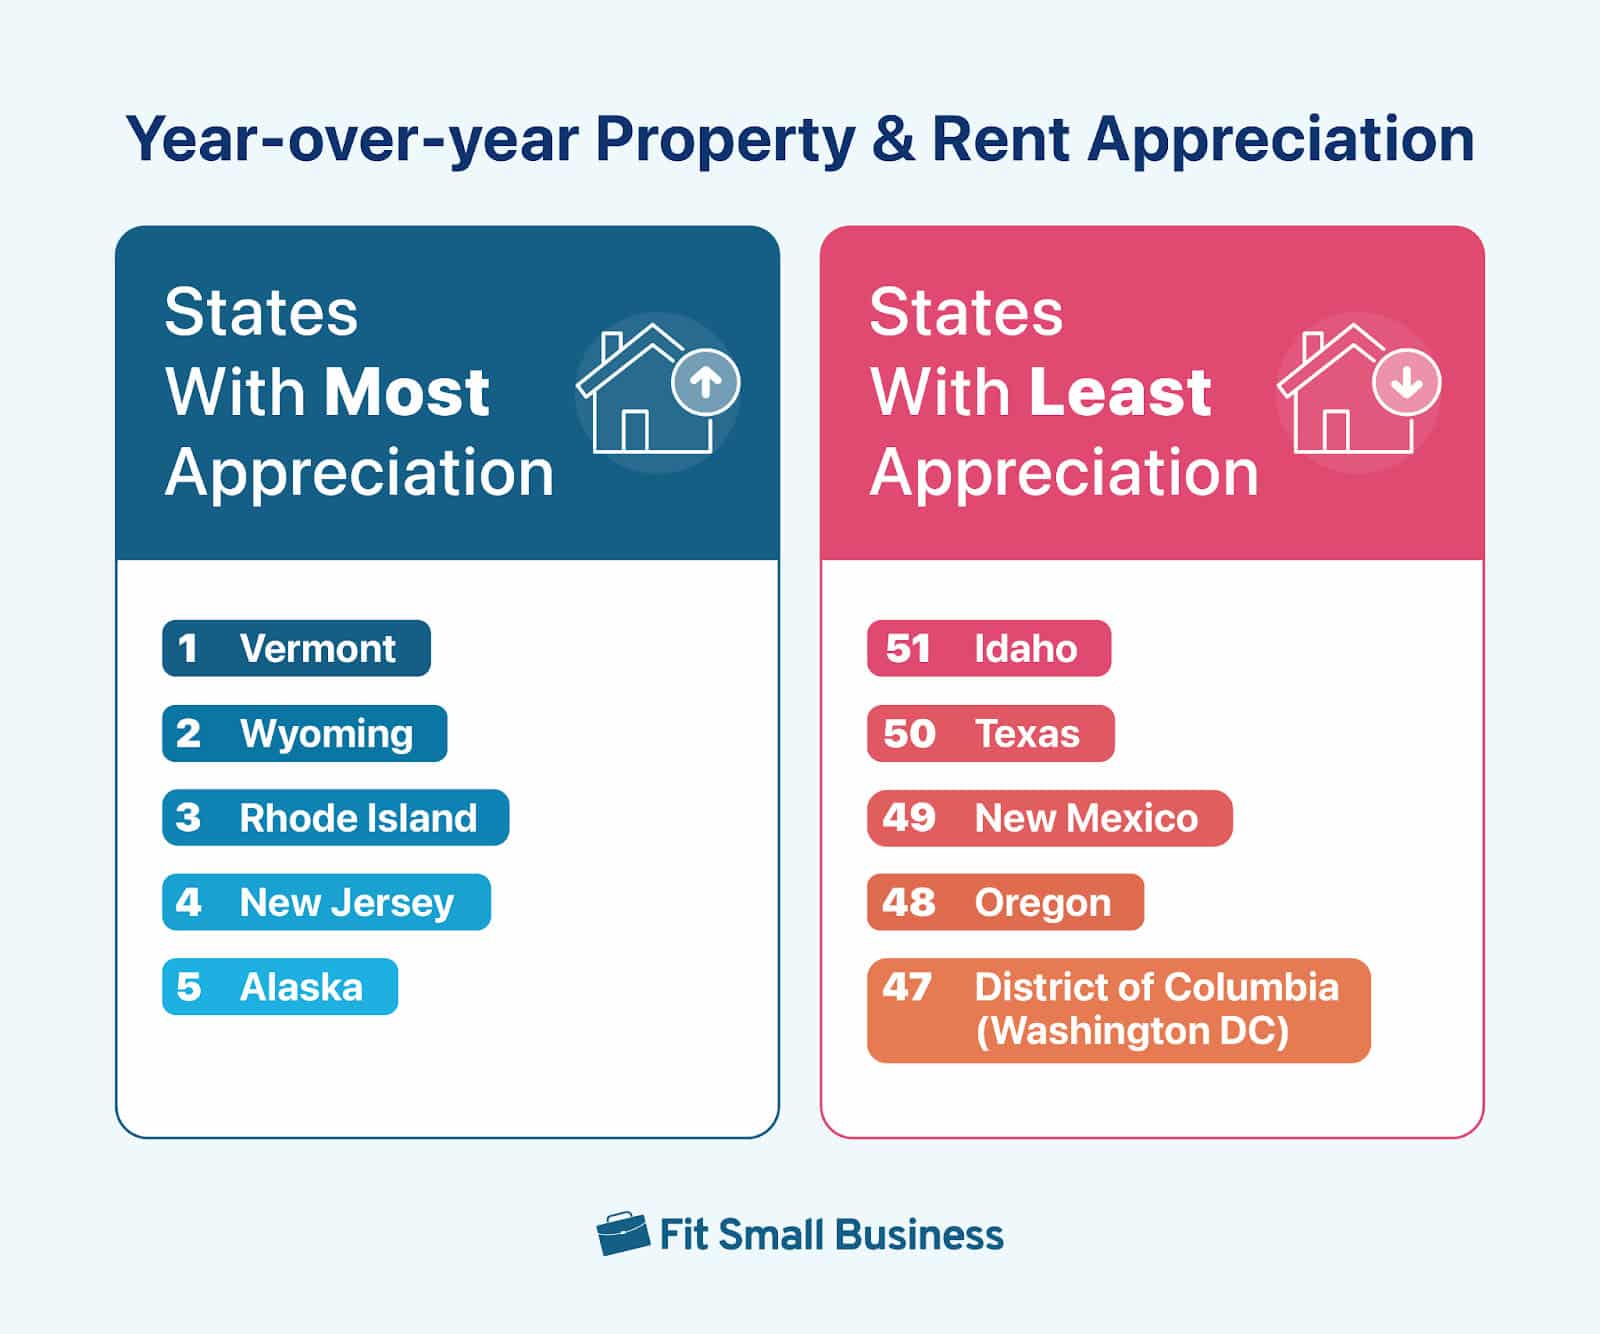 Best and worst five states ranking for year-over-year property and rent appreciation.